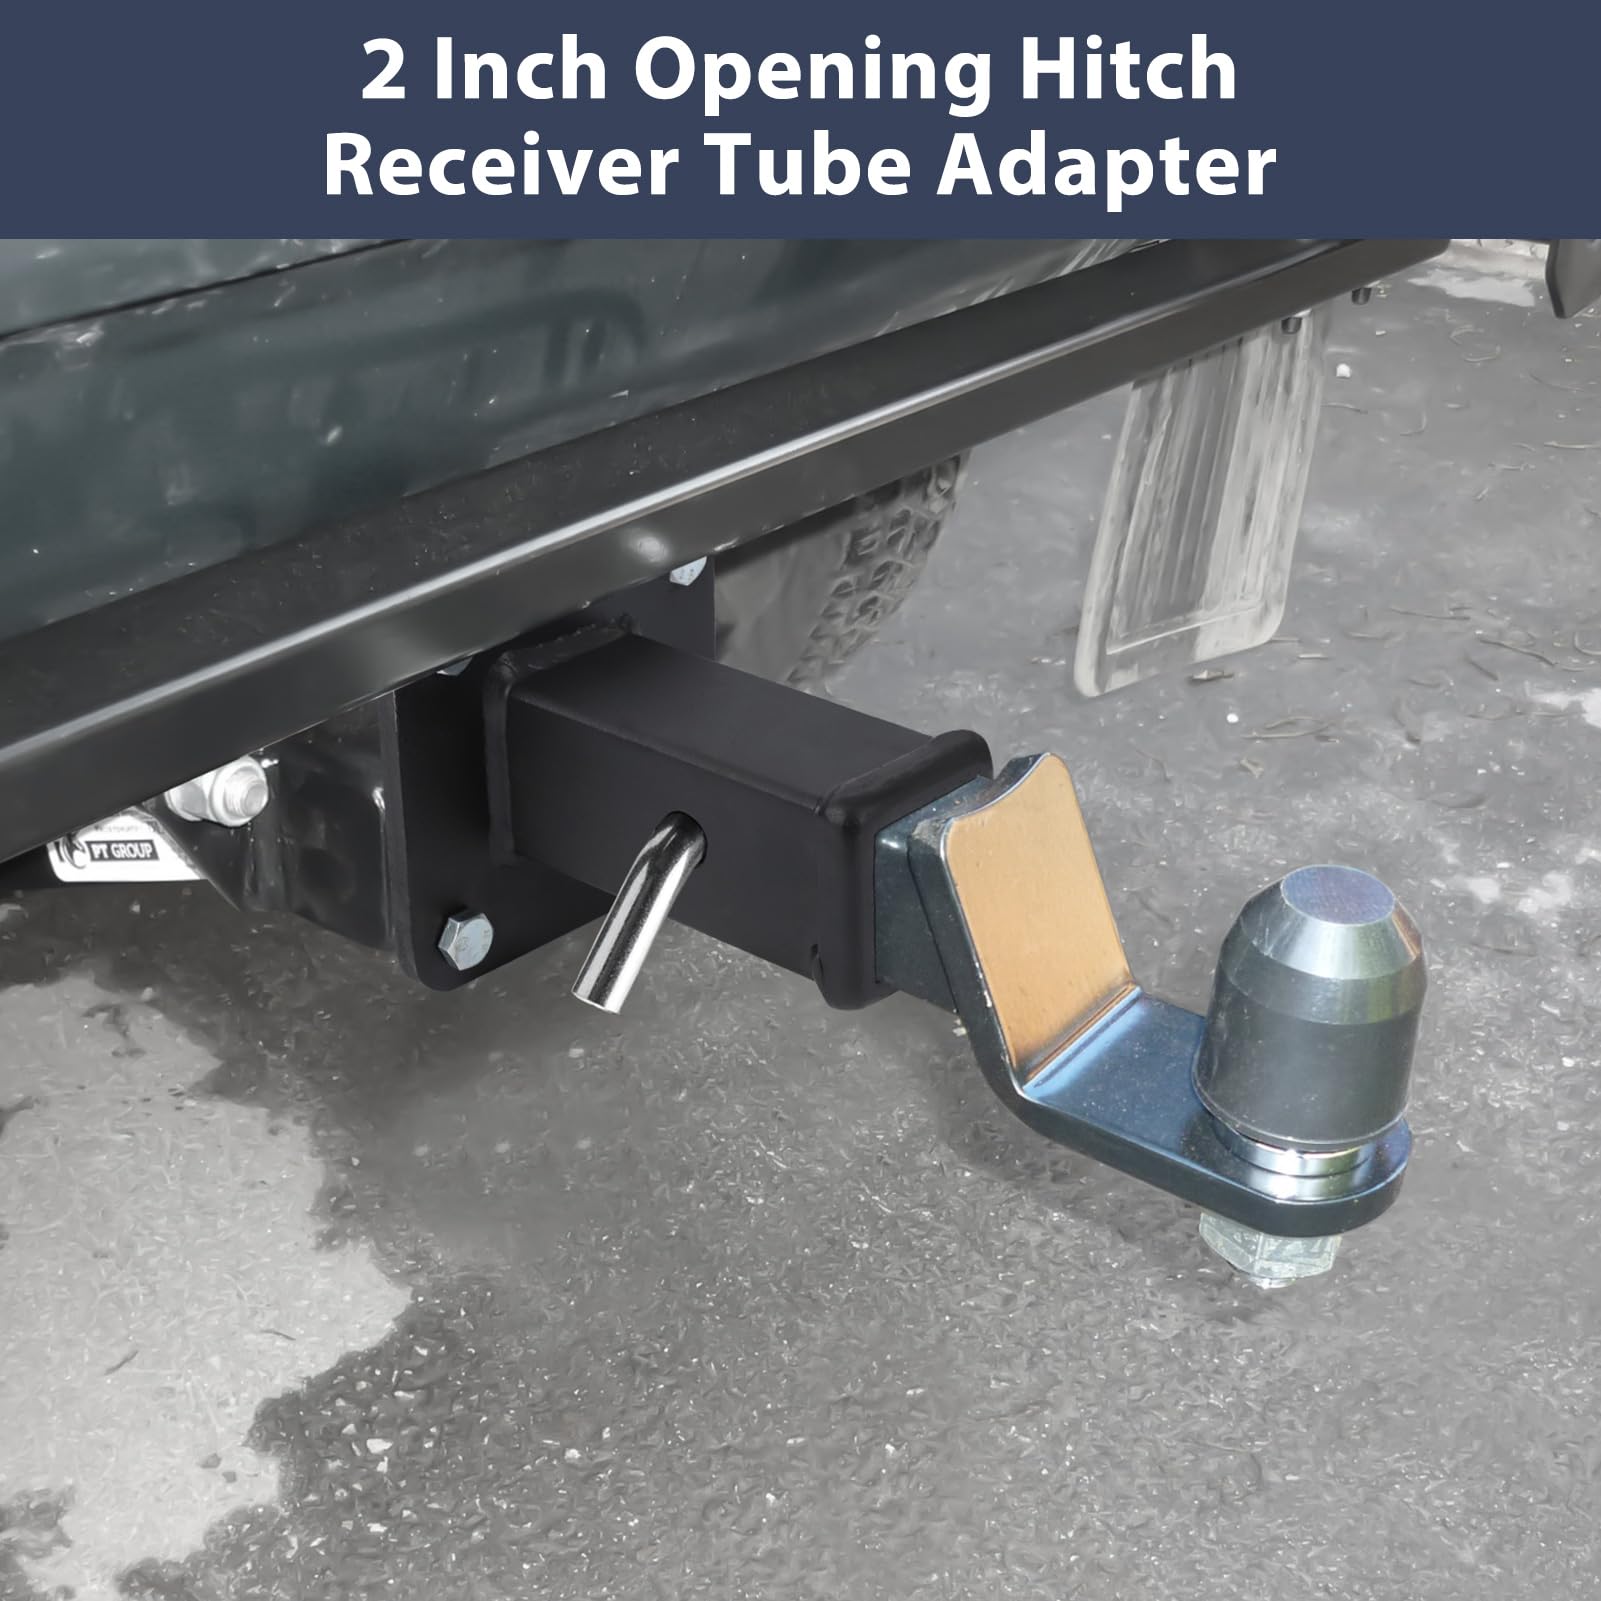 Hitch Wall Mount,2" Bolt-On Receiver Opening Hitch Tube,20,000 LBS Bumper Trailer Hitch Compatible for Skid Steer Mount Plate,Heavy Duty Hitch Receiver for Tractor,Lawn Mower,Ut